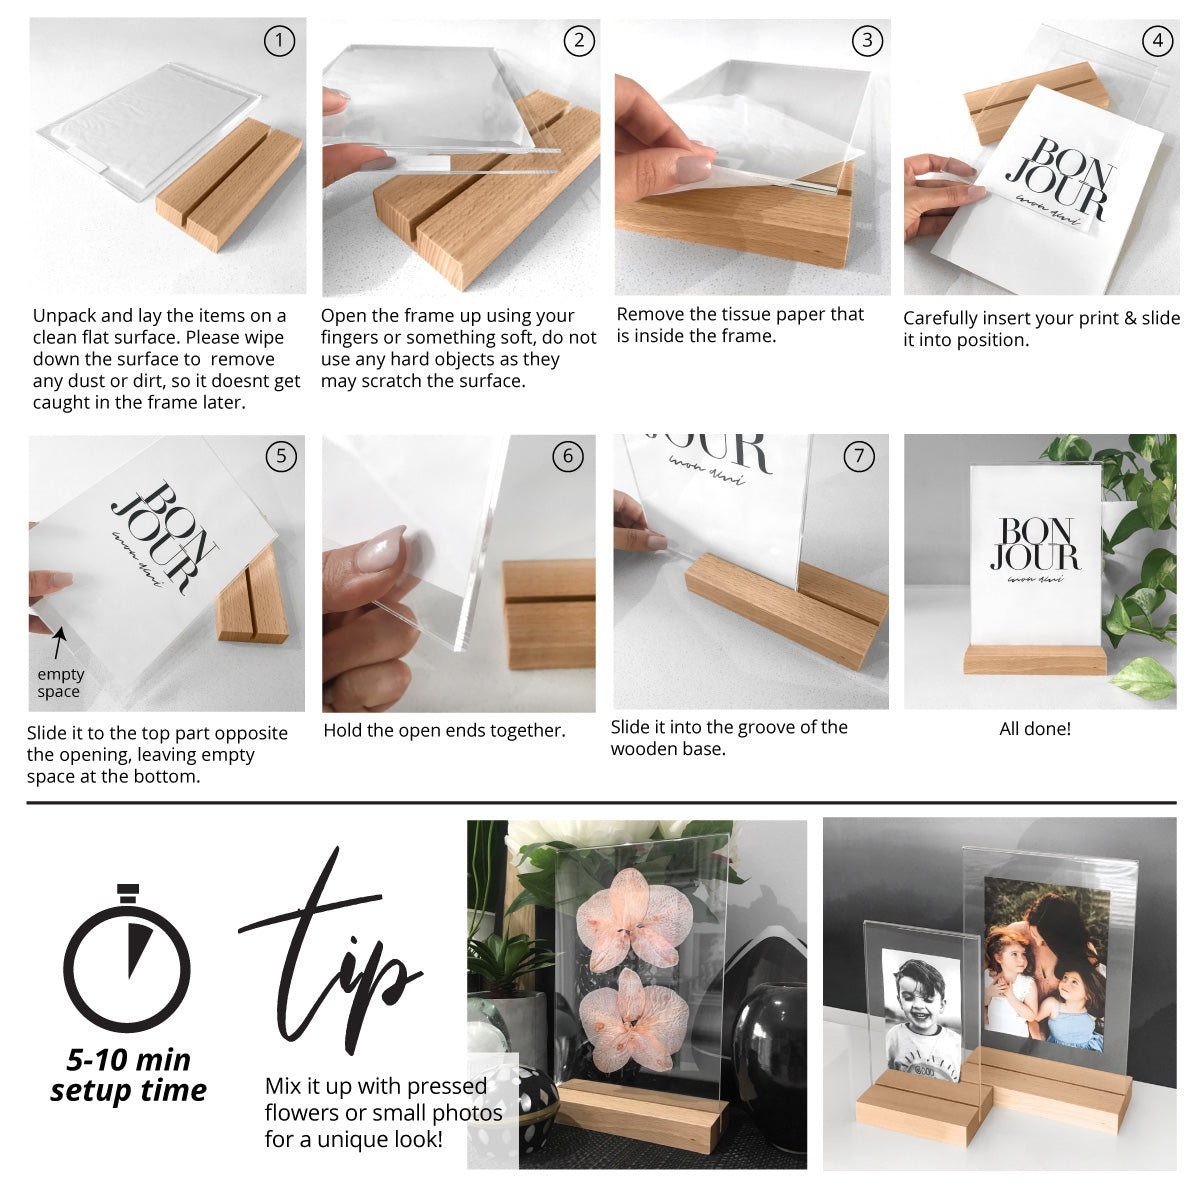 Clear Acrylic Photo Frame with Natural Wood Base Step by step usage instructions.